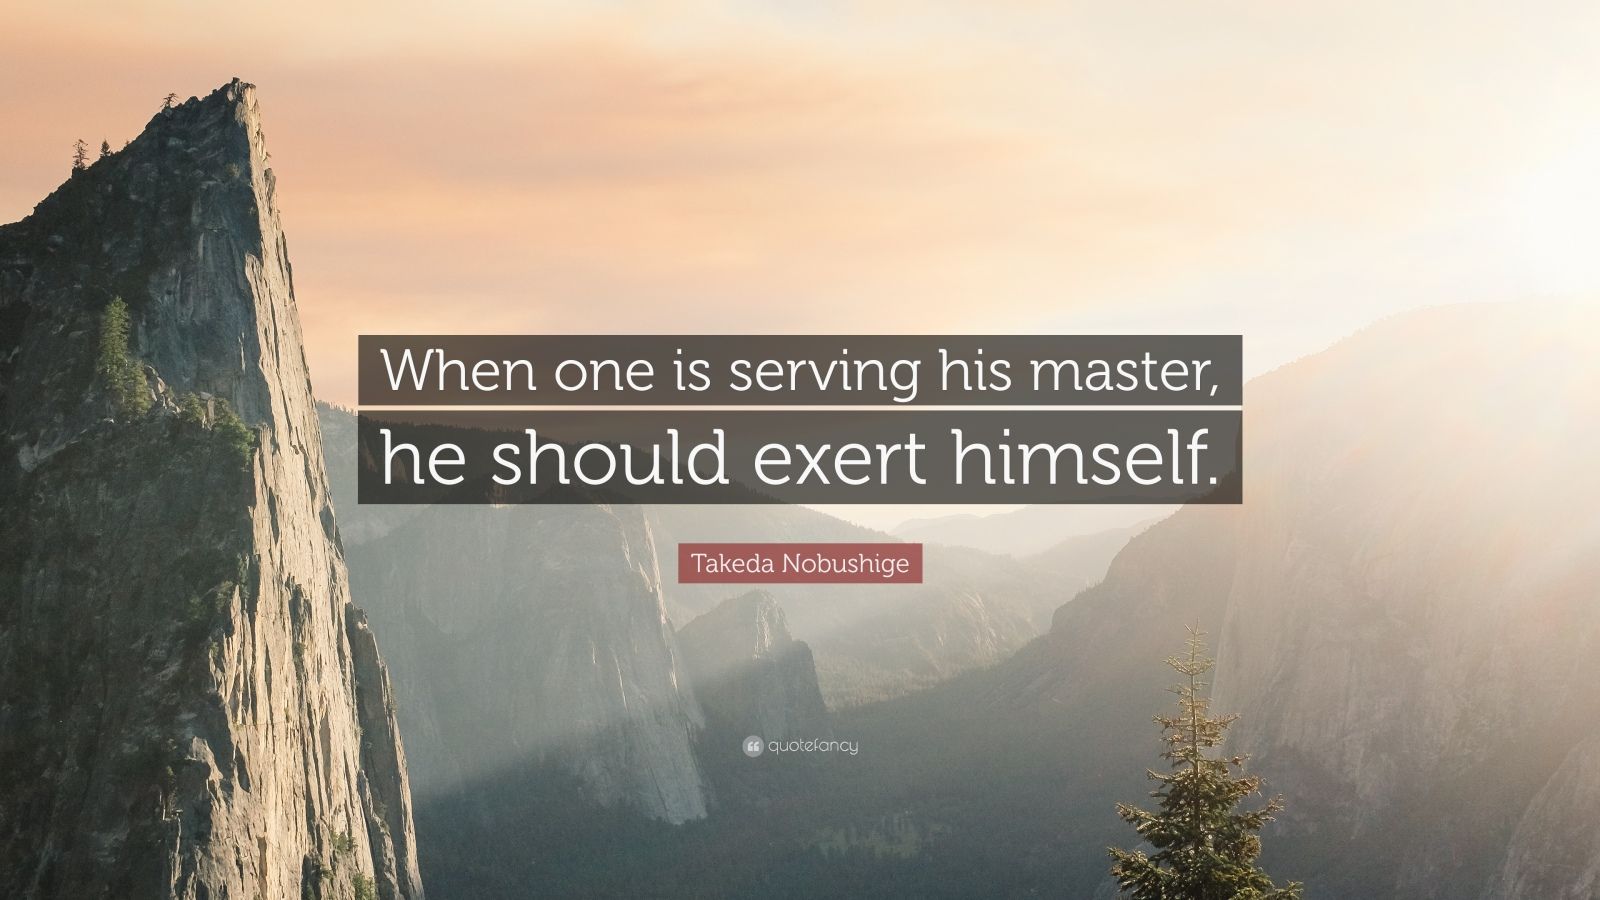 Top 8 Takeda Nobushige Quotes 2021 Edition Free Images QuoteFancy